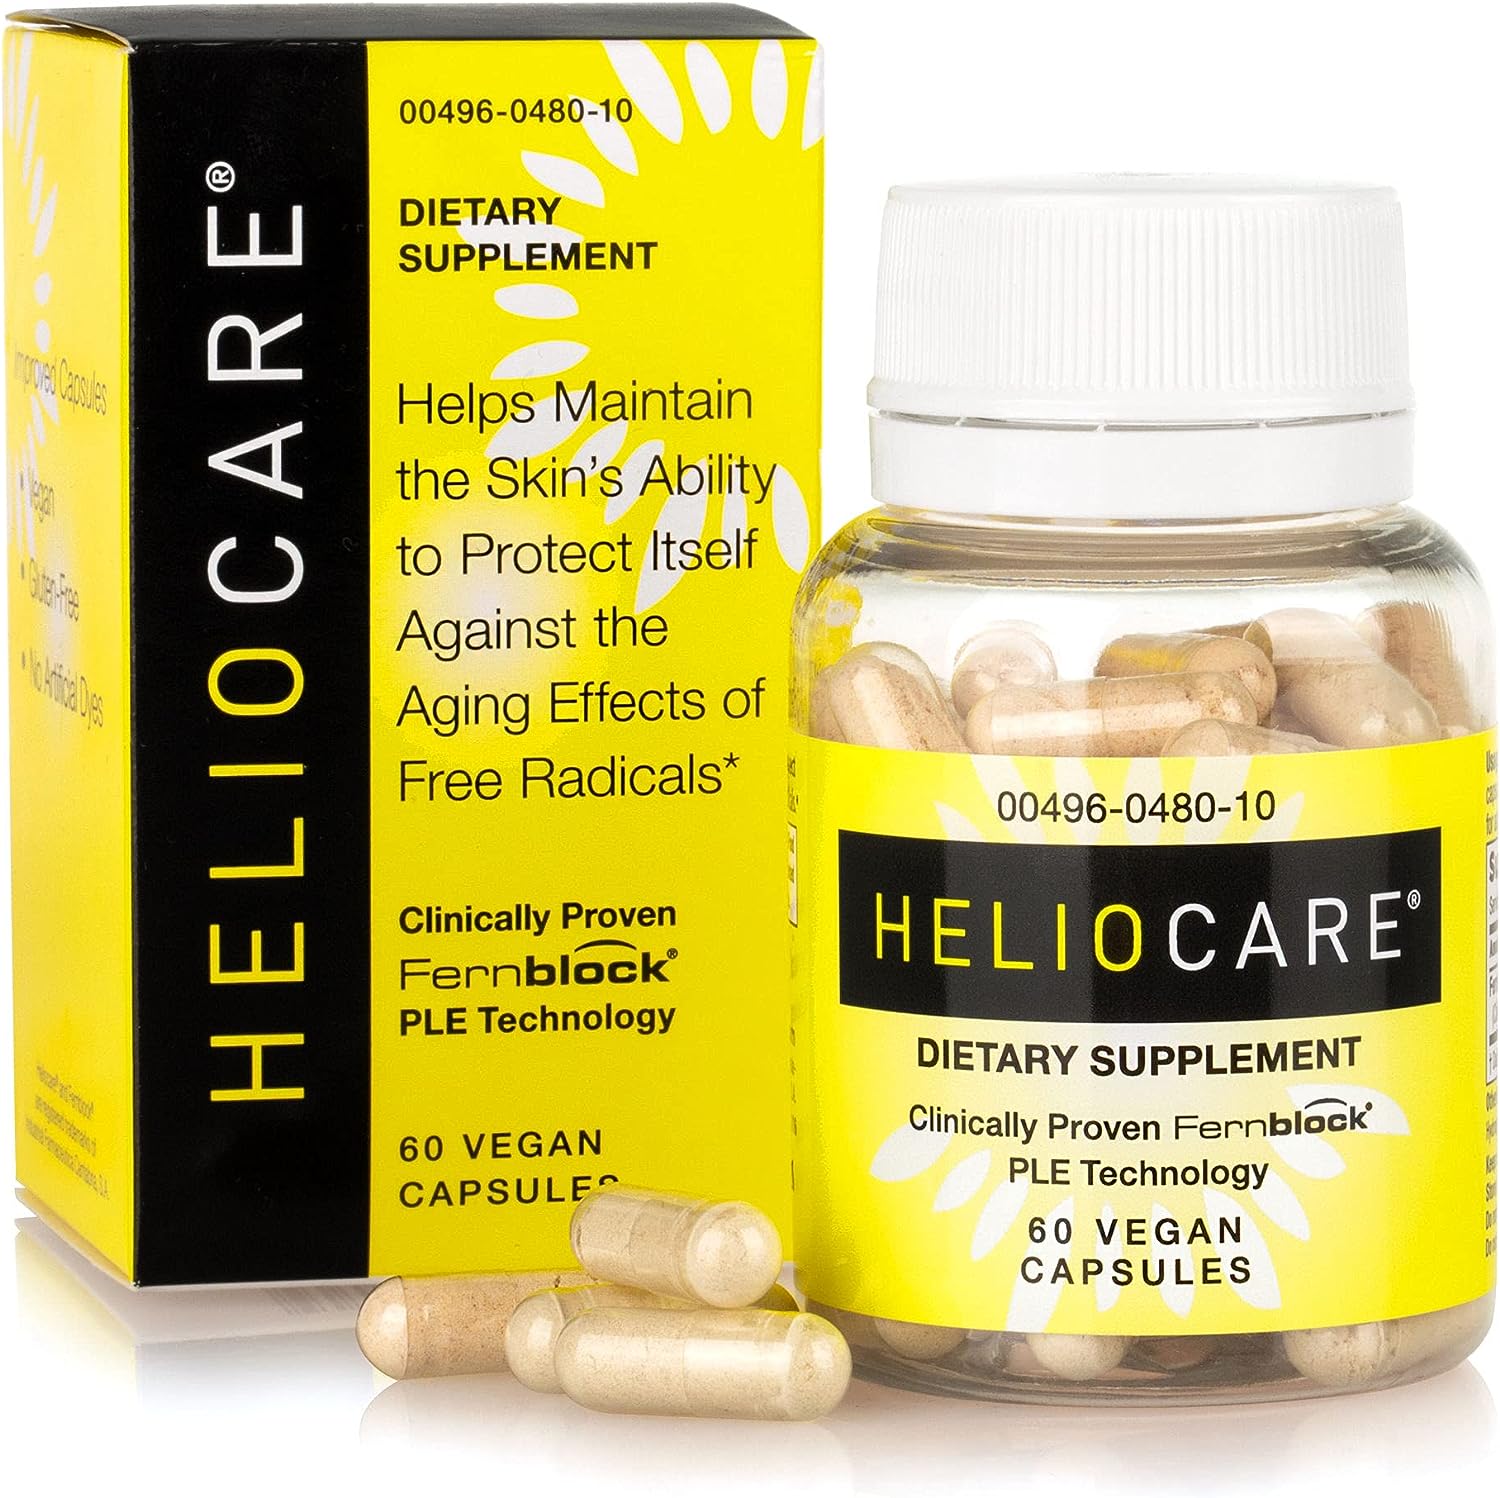 Heliocare-Skin-Care-Dietary-Supplement.jpg